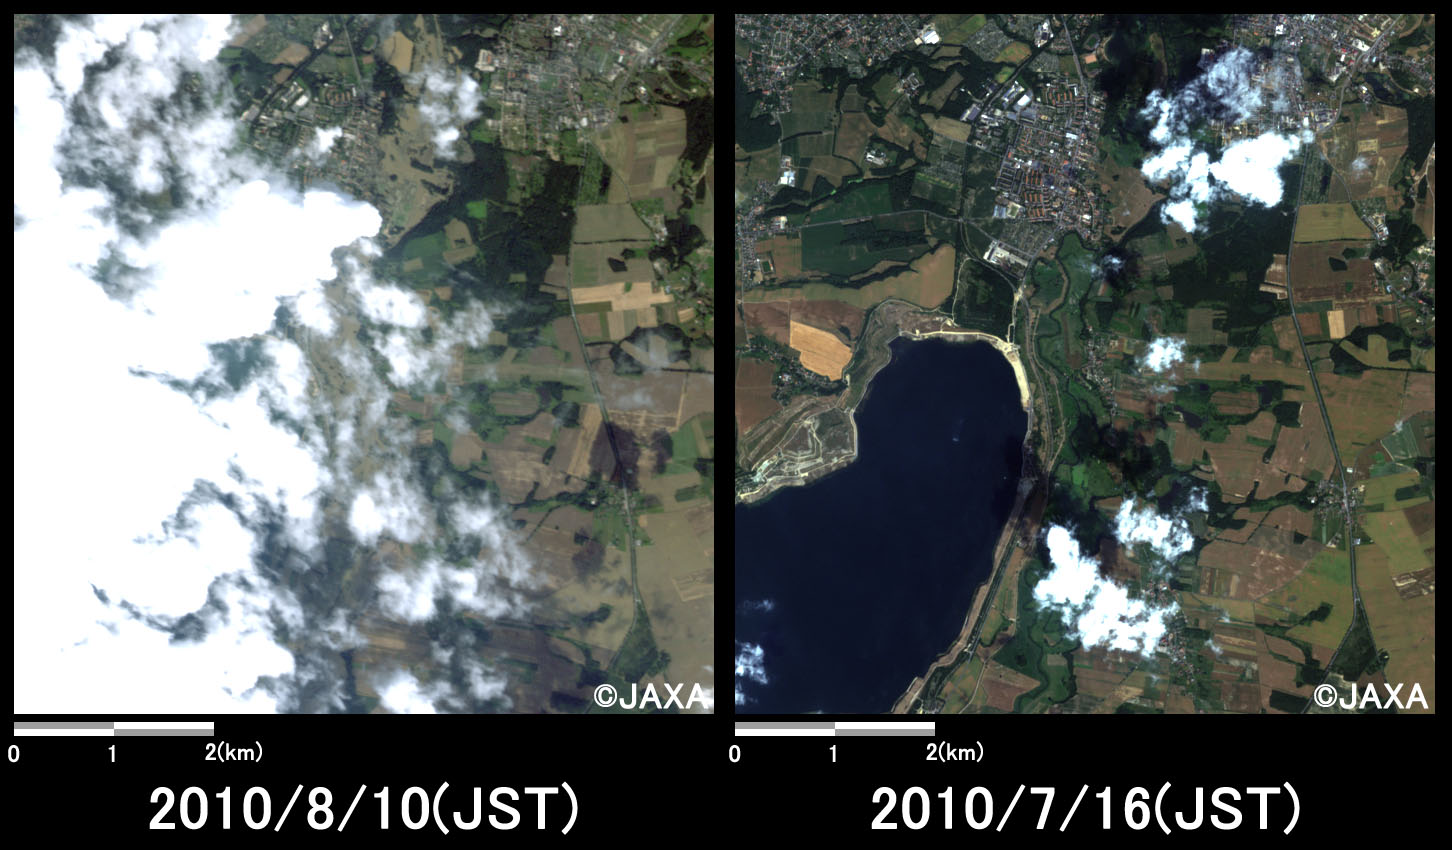 Fig. 2: Enlarged images of the submerged area at Zgorzelec (49 square kilometers, left: August 10, 2010; right: July 16, 2010).